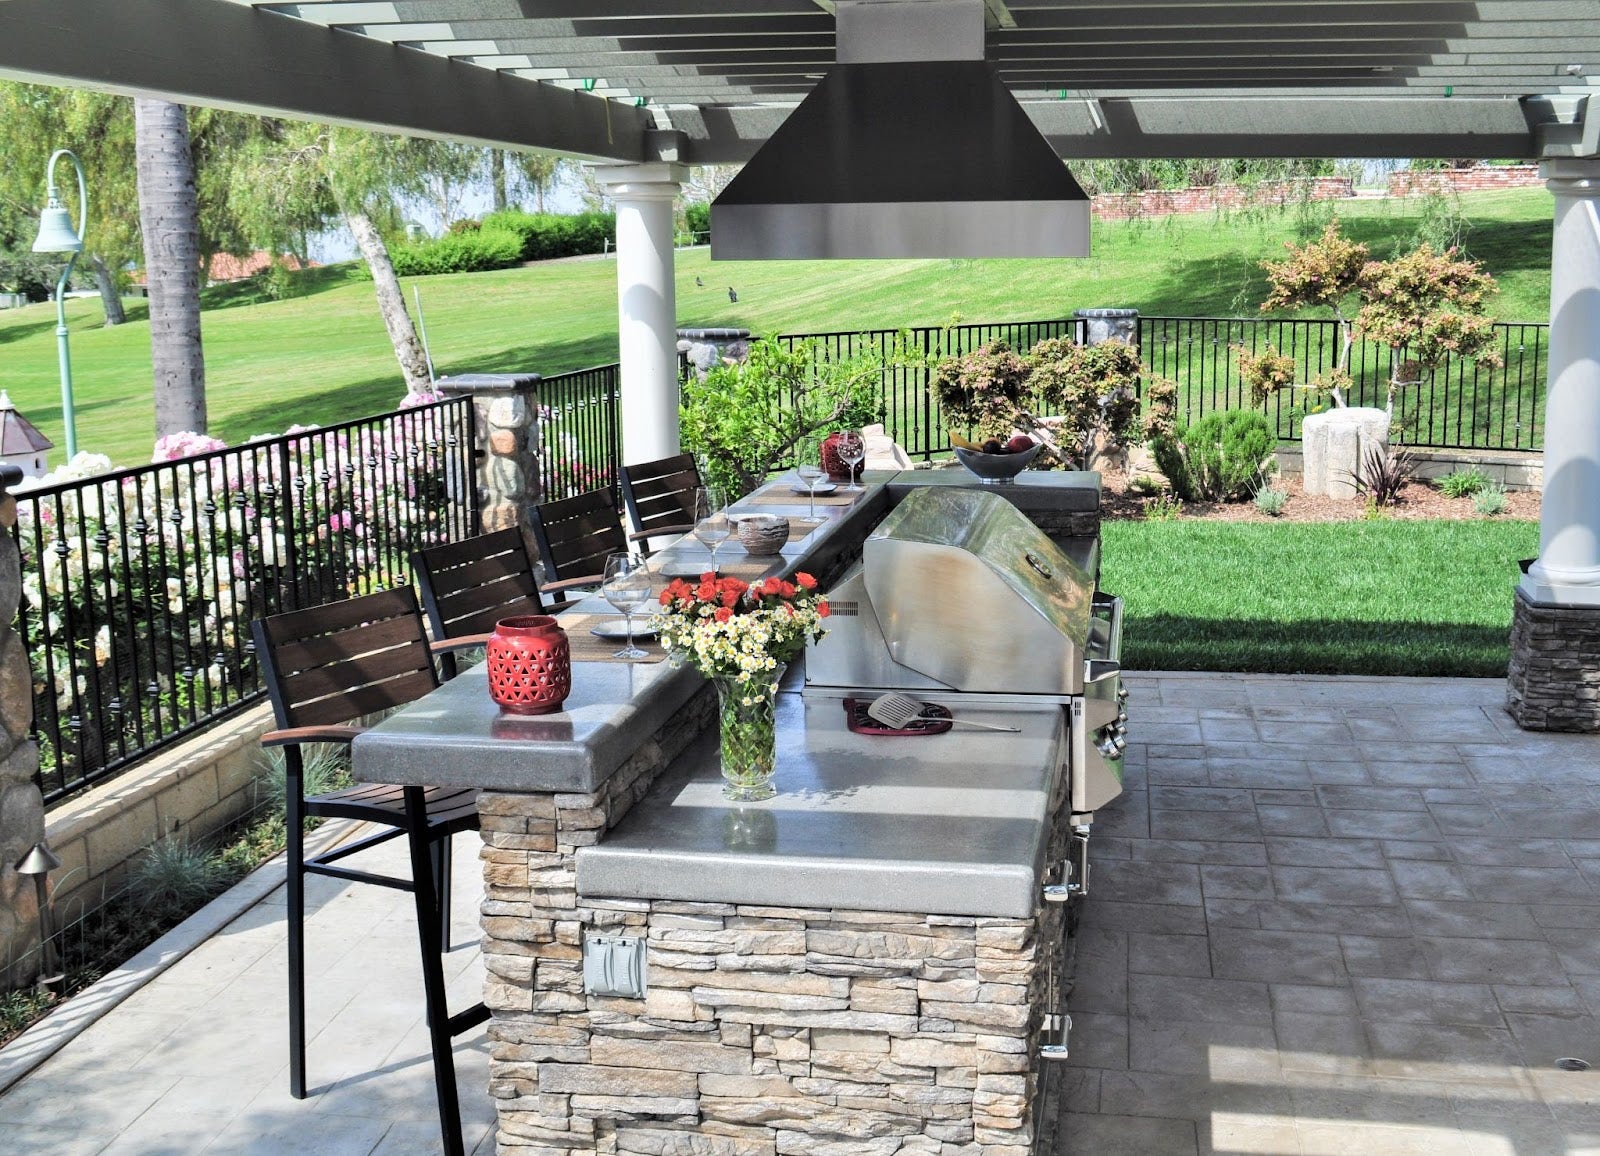 Suburban Backyard Oasis: Proline PLJI 103 hood keeps the air clear in this outdoor kitchen. Stone finishes and a lawn view create a relaxing space for gatherings. - Proline Range Hoods - prolinerangehoods.com 